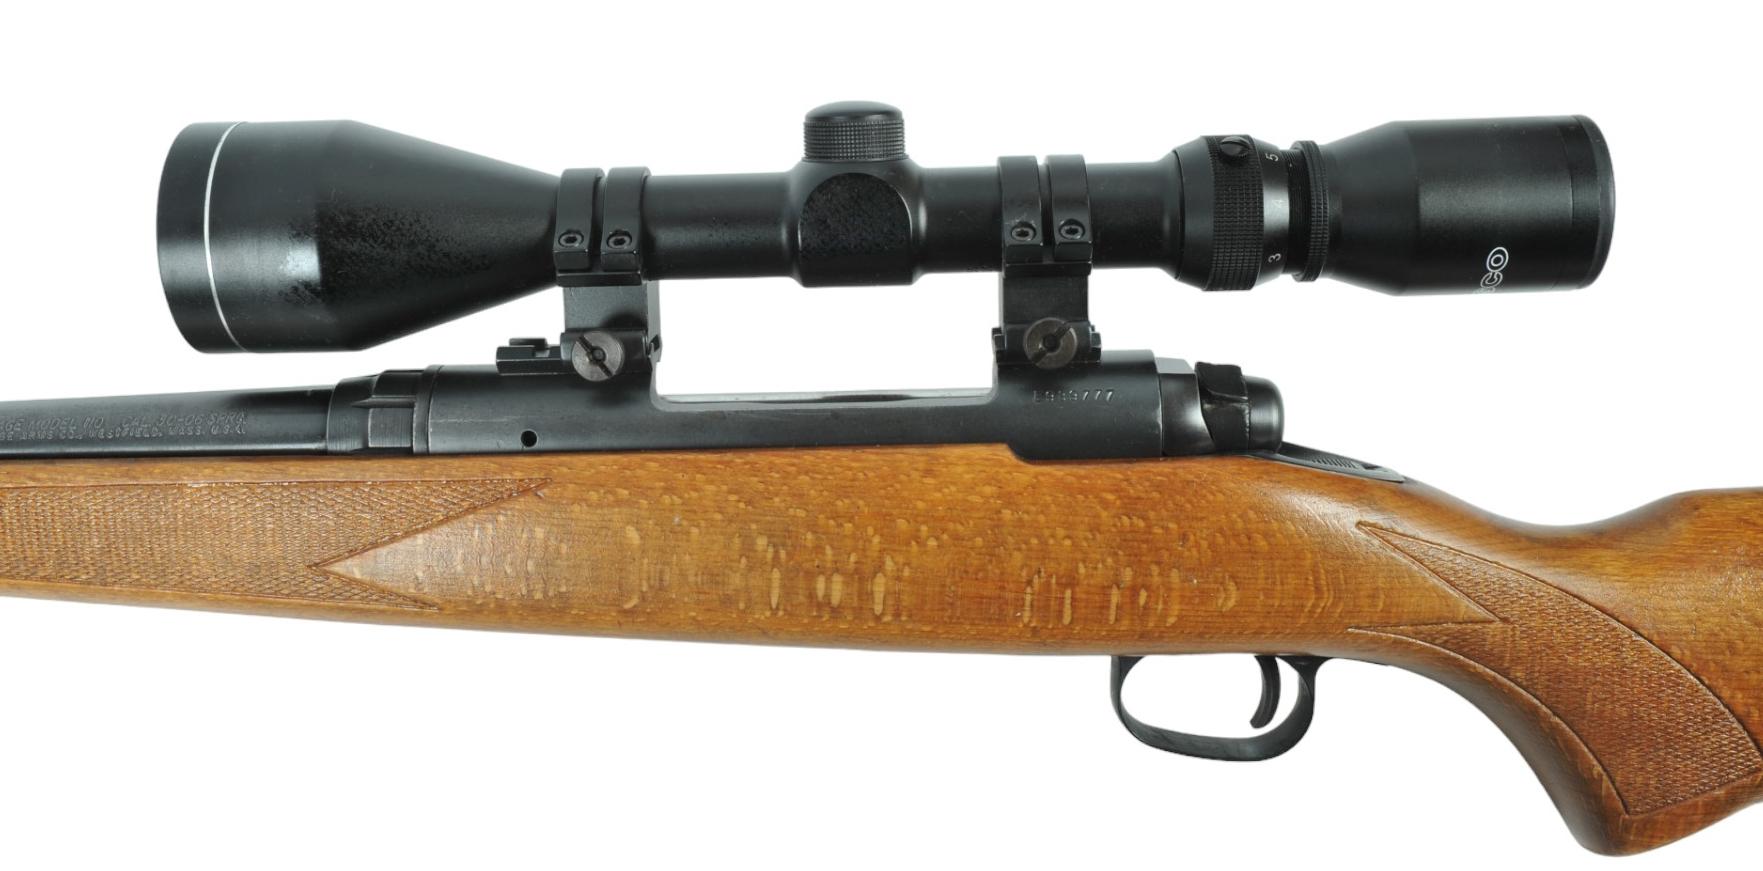 Savage Model 110 30-06 Bolt-action Rifle FFL Required: E989777 (KDN1)